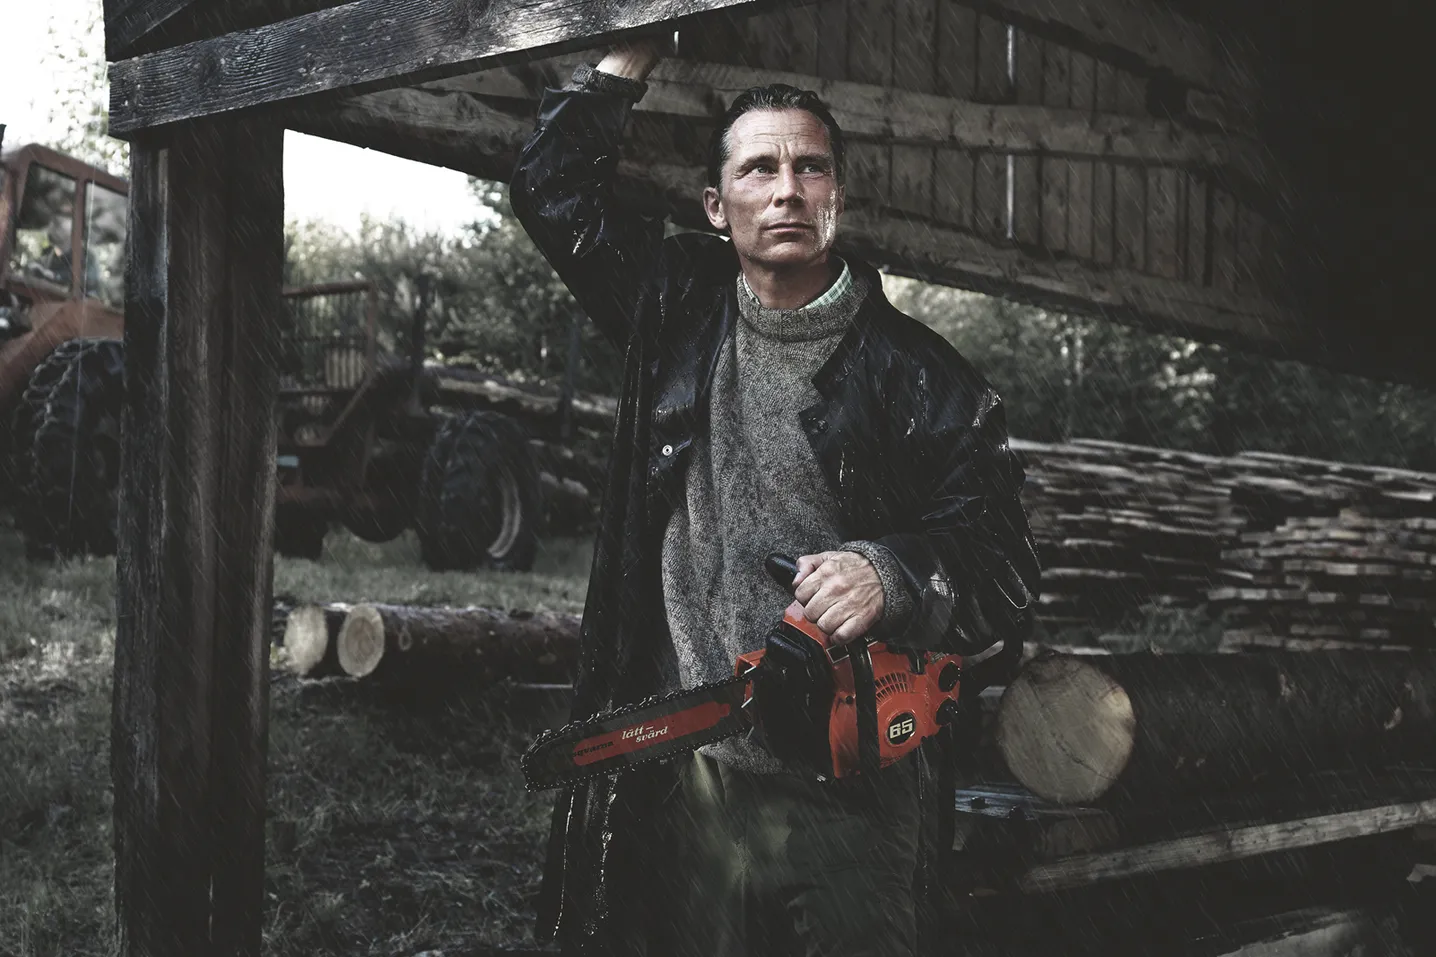 Man Under Outdoor Roof Holding Husqvarna Chainsaw